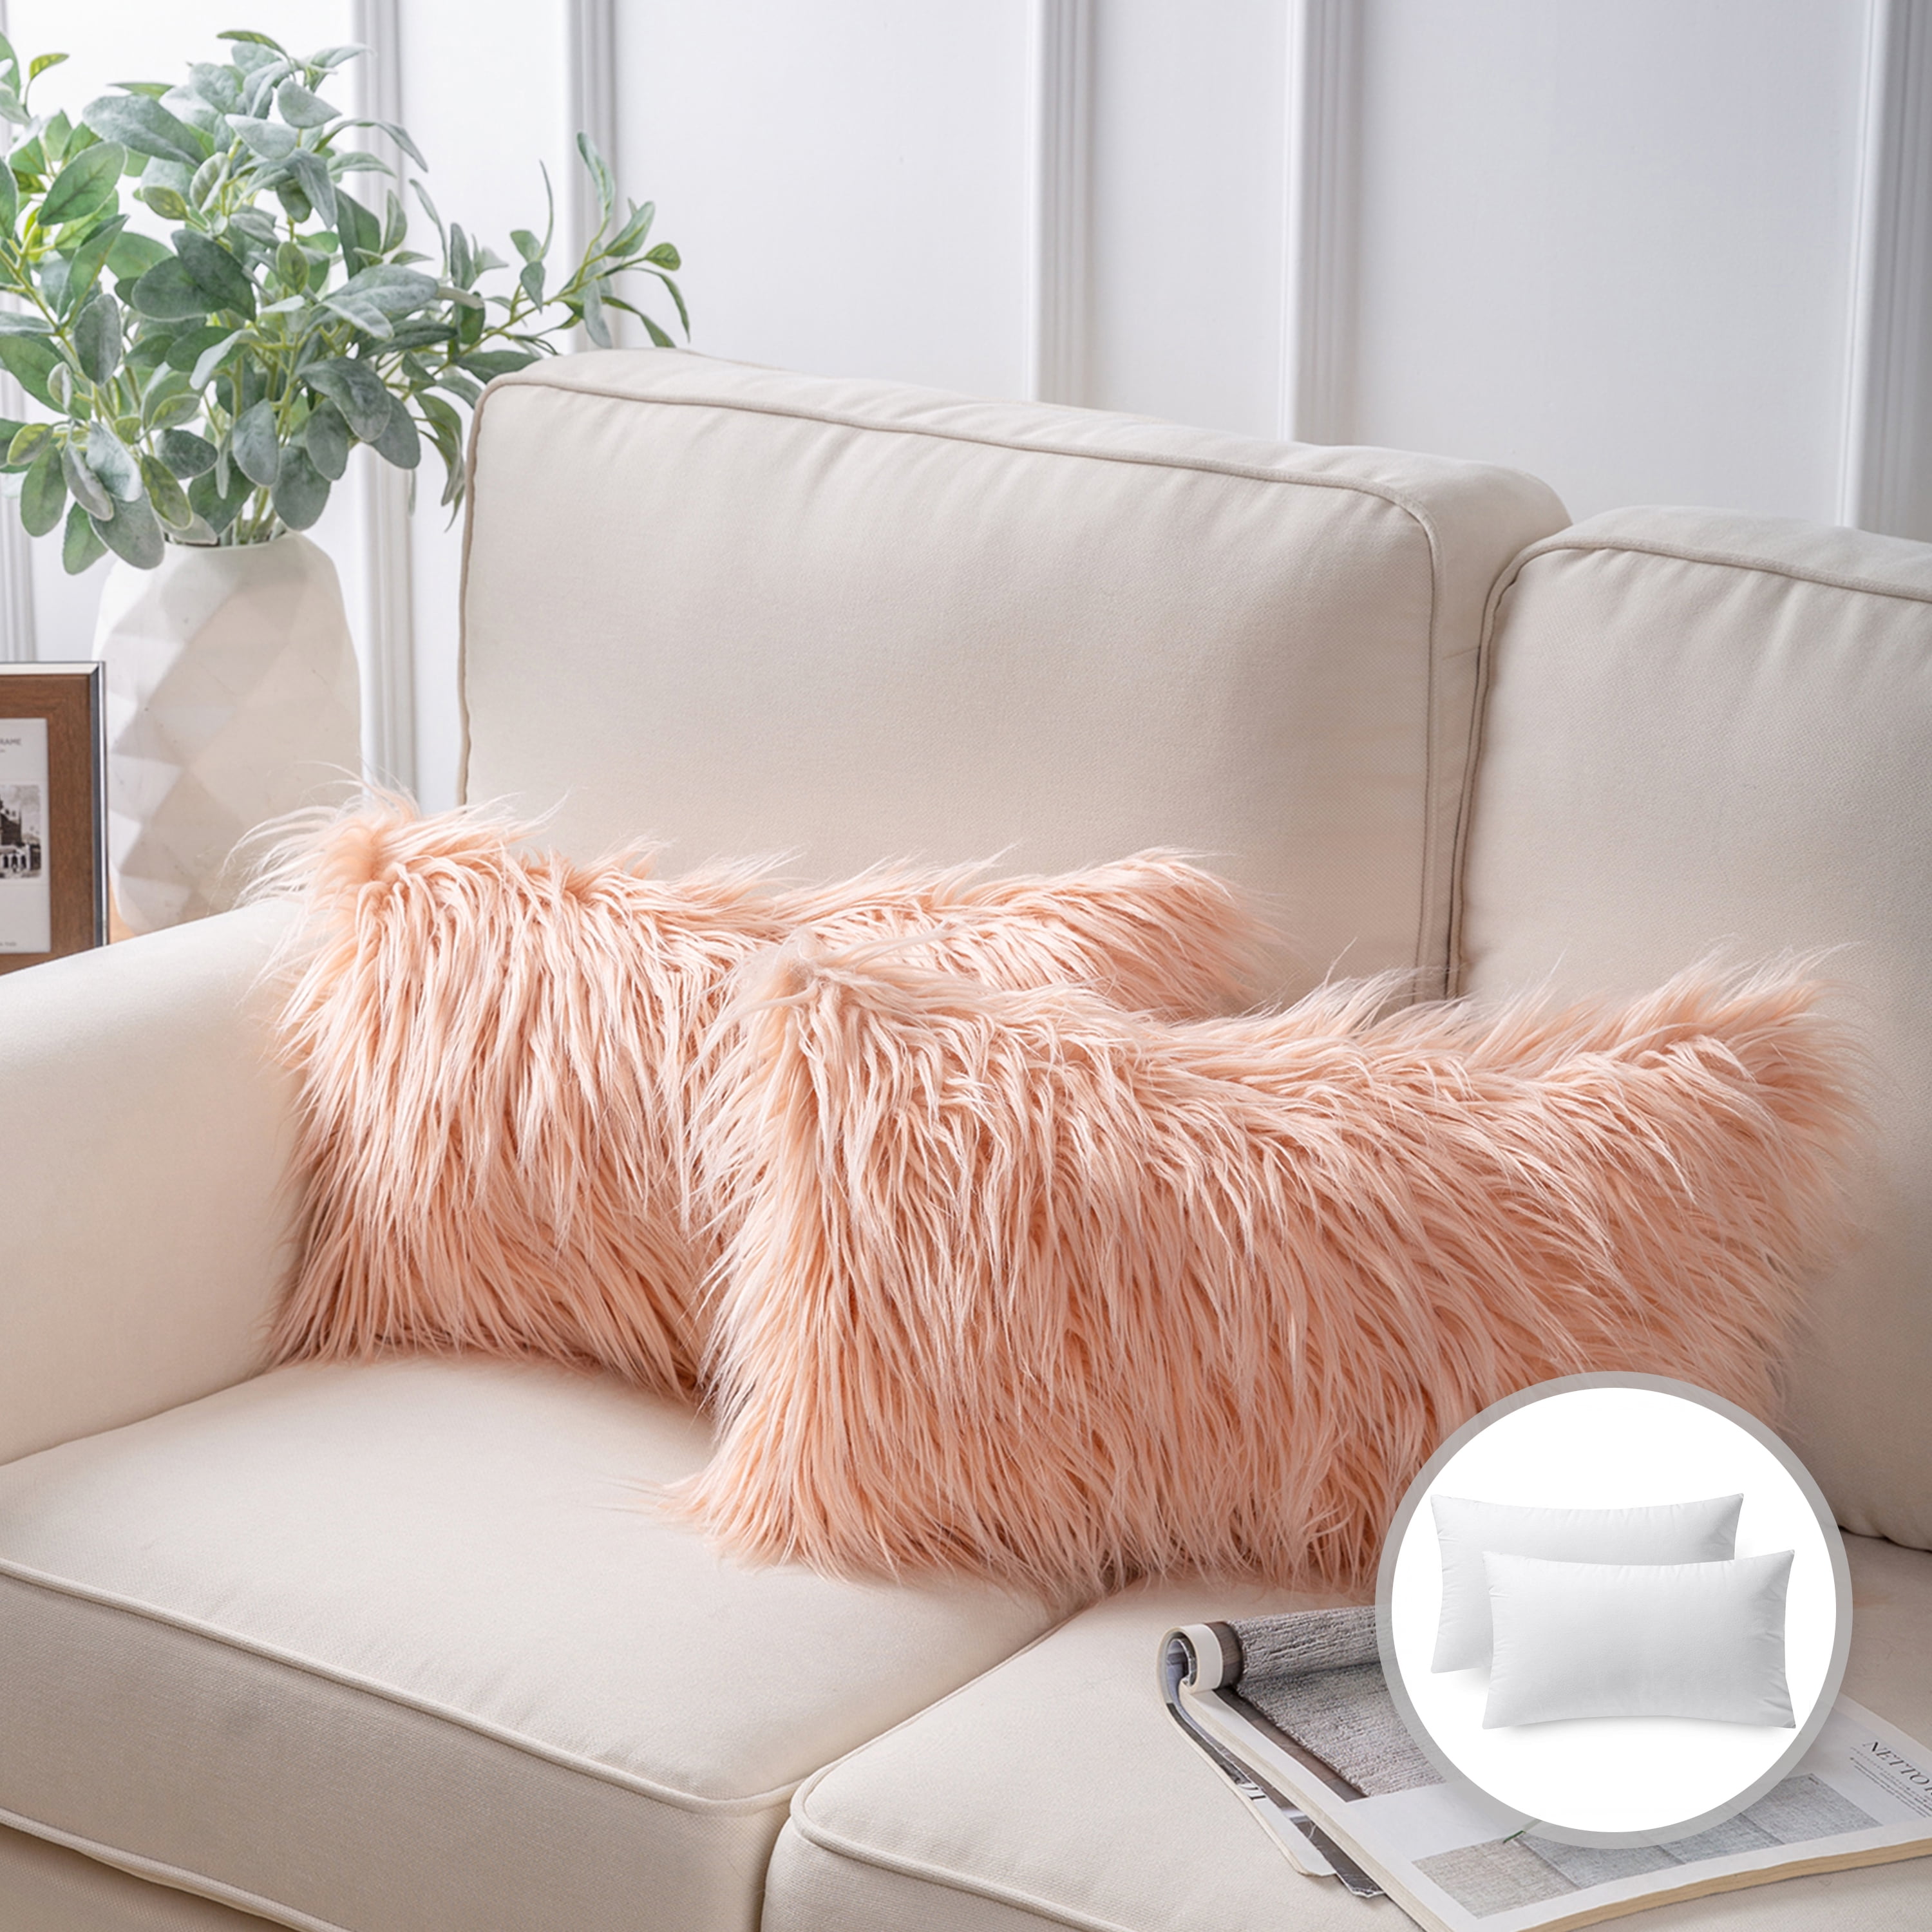 90cm Big Size Fluffy Back Cushion Huggable Sleeping Pillow Decorative  Pillows For Sofa Girly Home Decor Thicken Washable - AliExpress